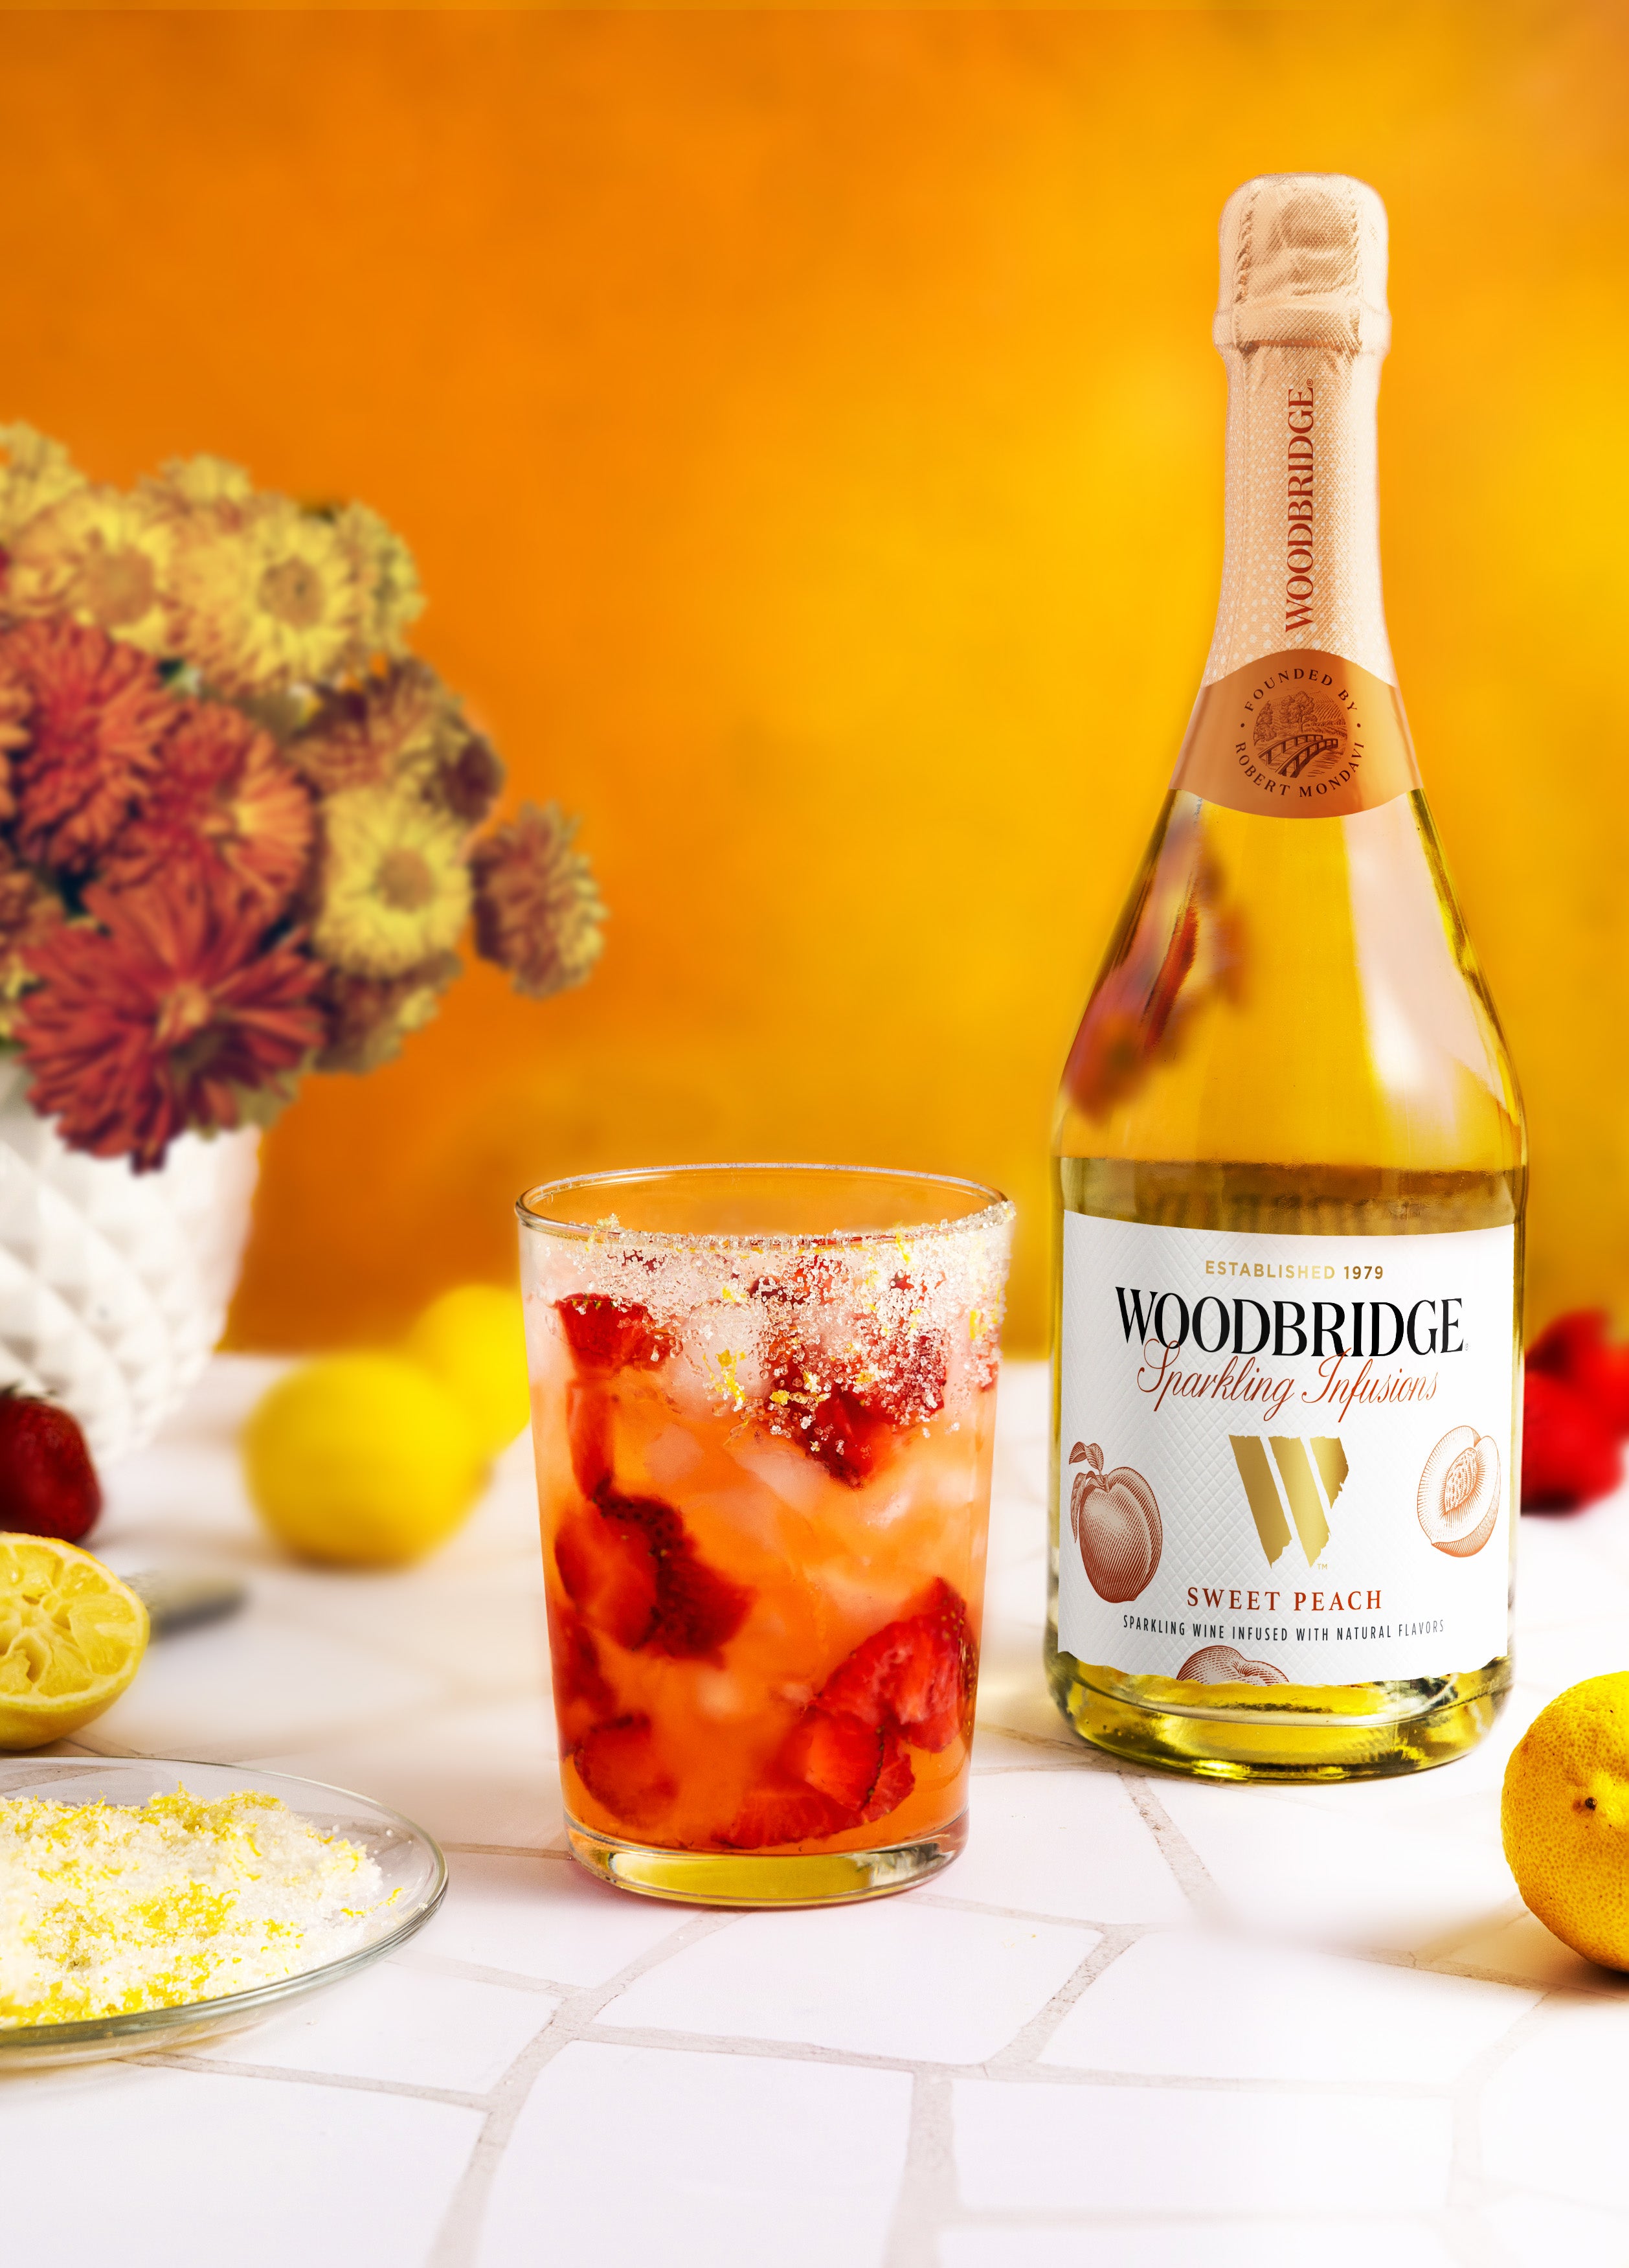 Sparkling Infusions Sweet Peach Spritz